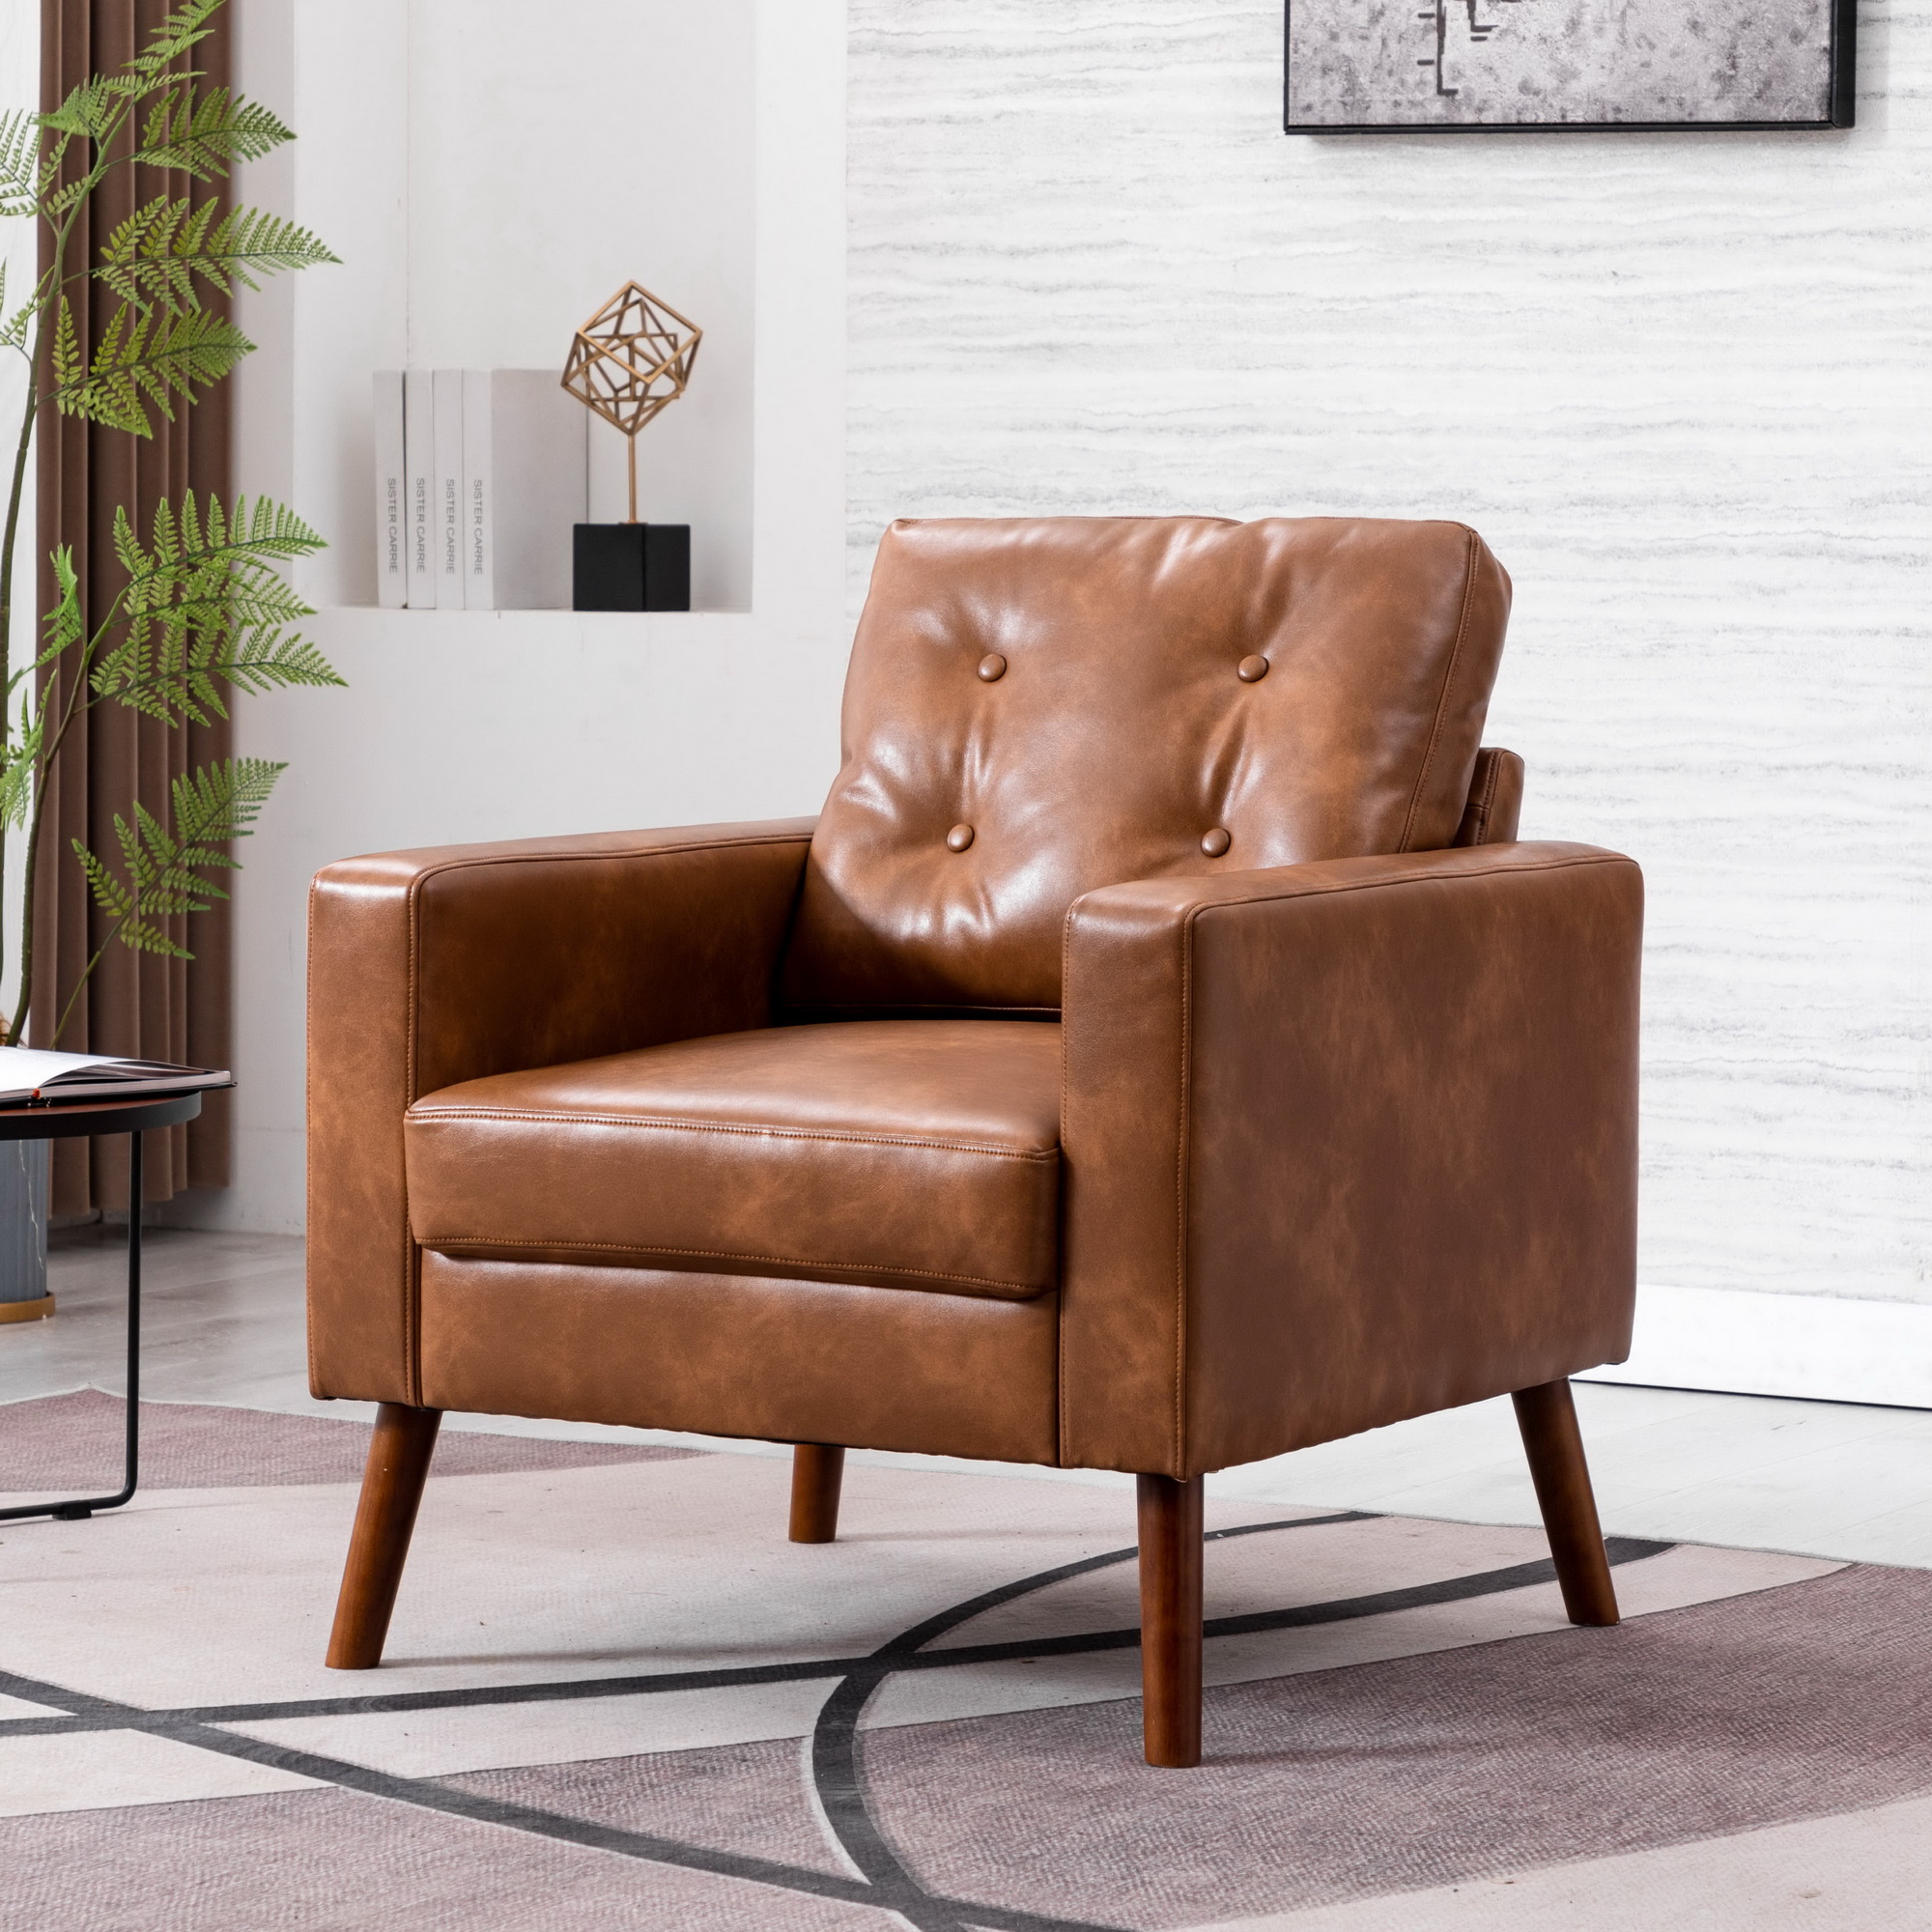 VESCASA Tufted Accent Arm Chair with Wood Legs, Comfy Upholstered Single Sofa